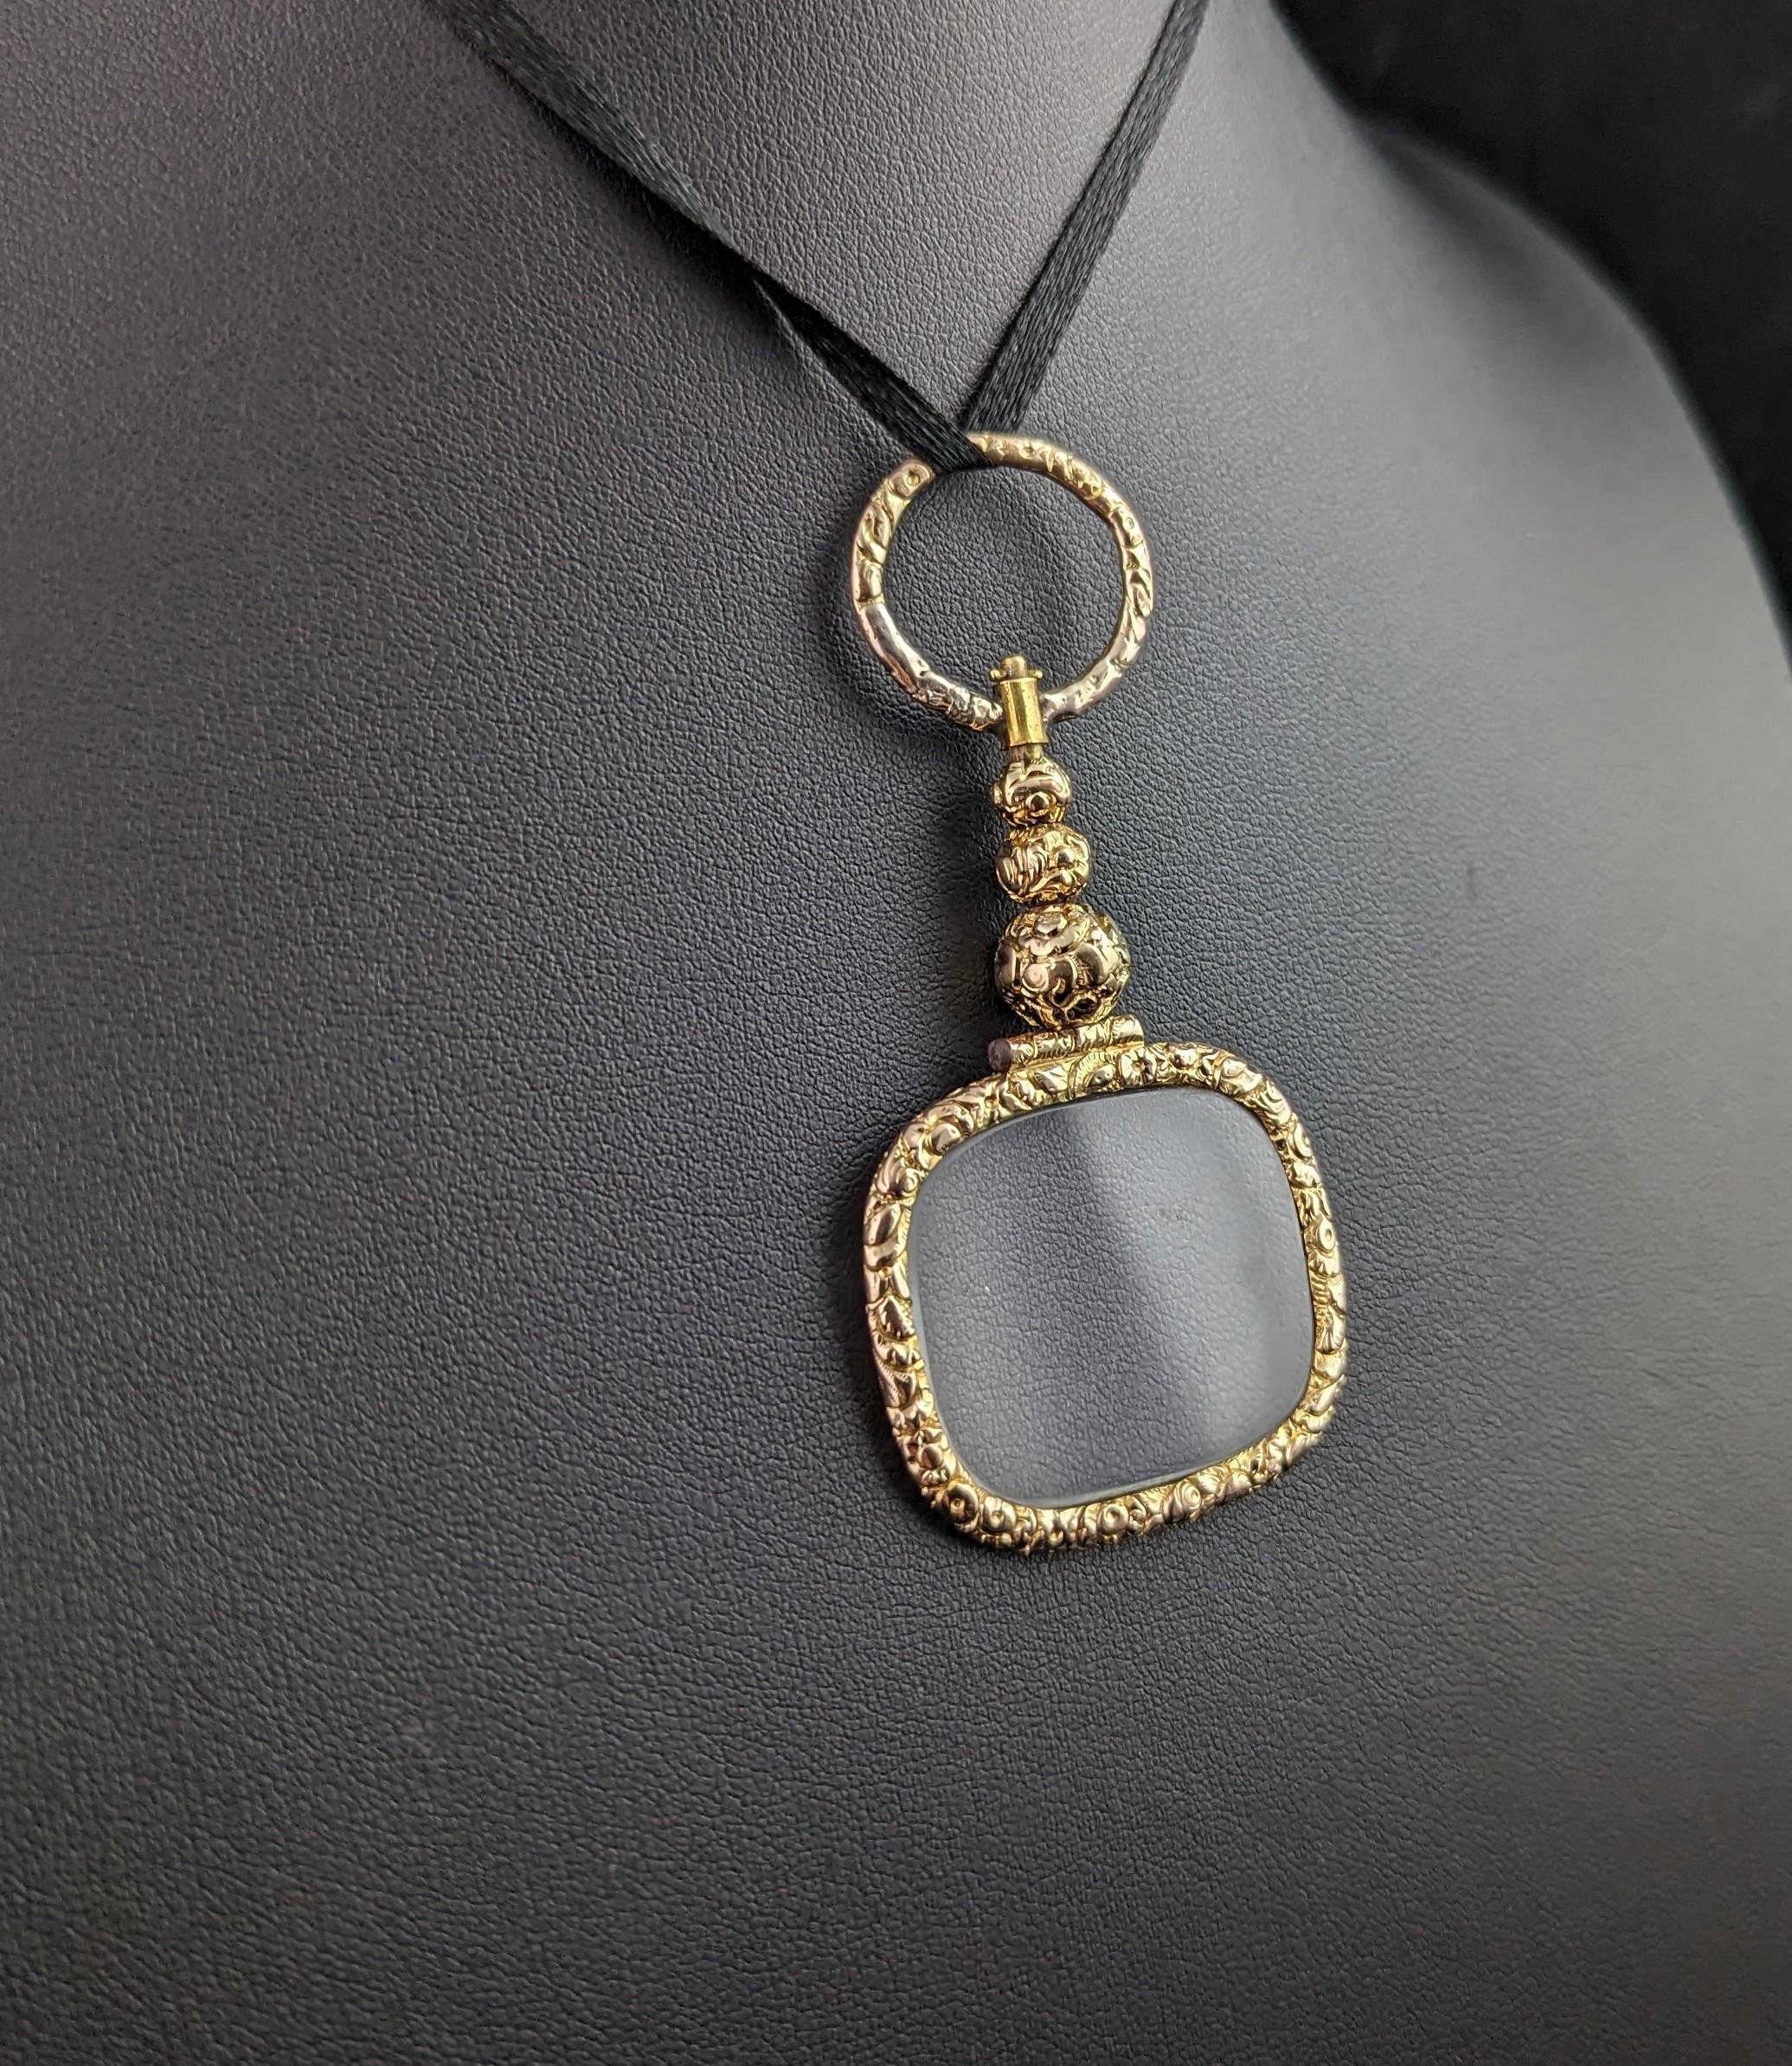 I adore this stunning antique, Georgian era gold quizzing glass pendant and you are sure to love it too!

Usually worn around the neck on a ribbon or chain for ease of use, these beautiful decorative pieces really were a functional piece of